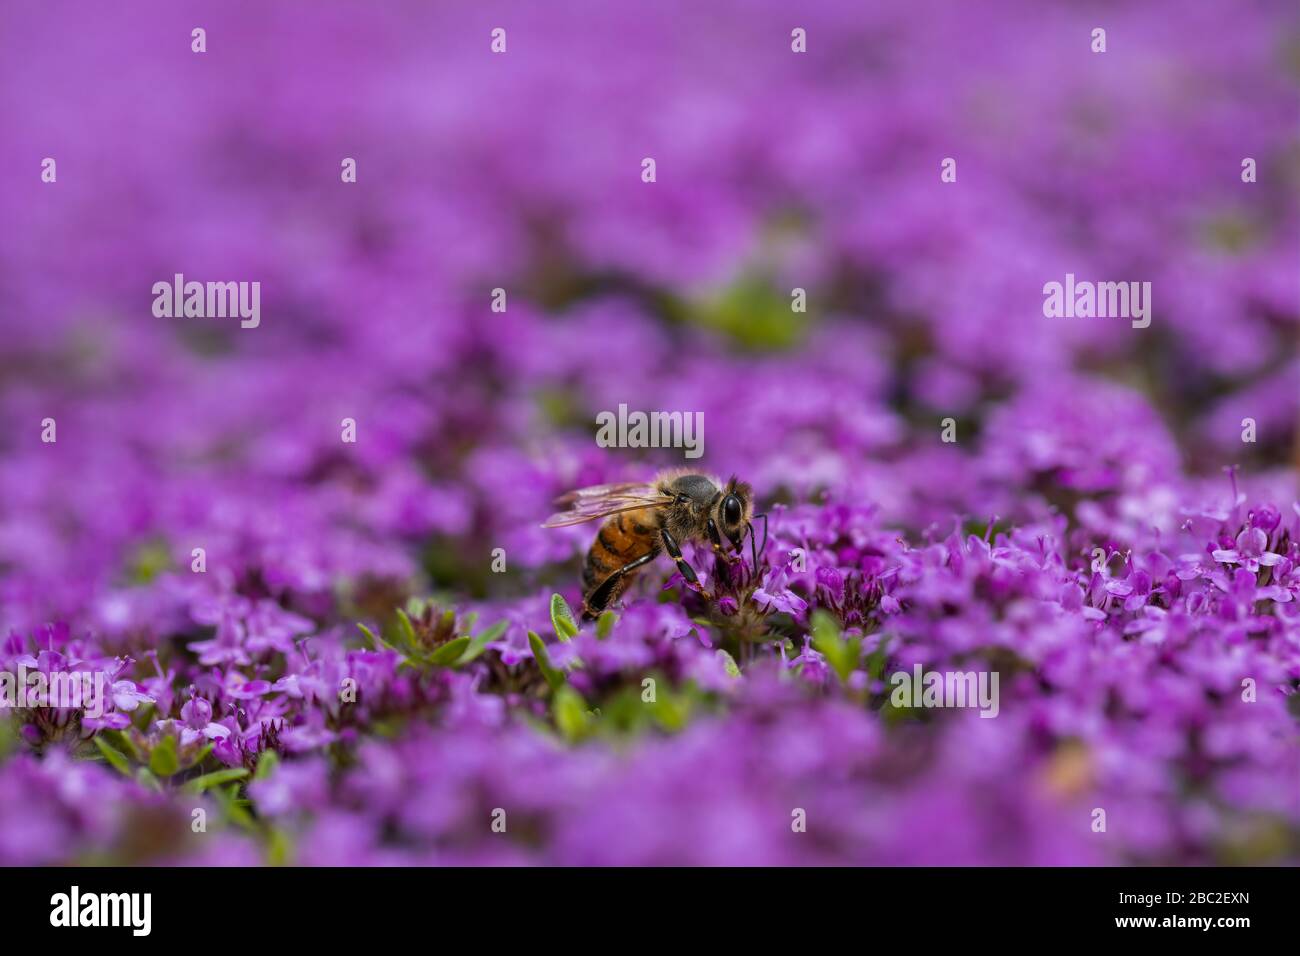 Close-up image of a bee collecting nectar on Creeping Thyme flowers in a residential front yard garden. Stock Photo